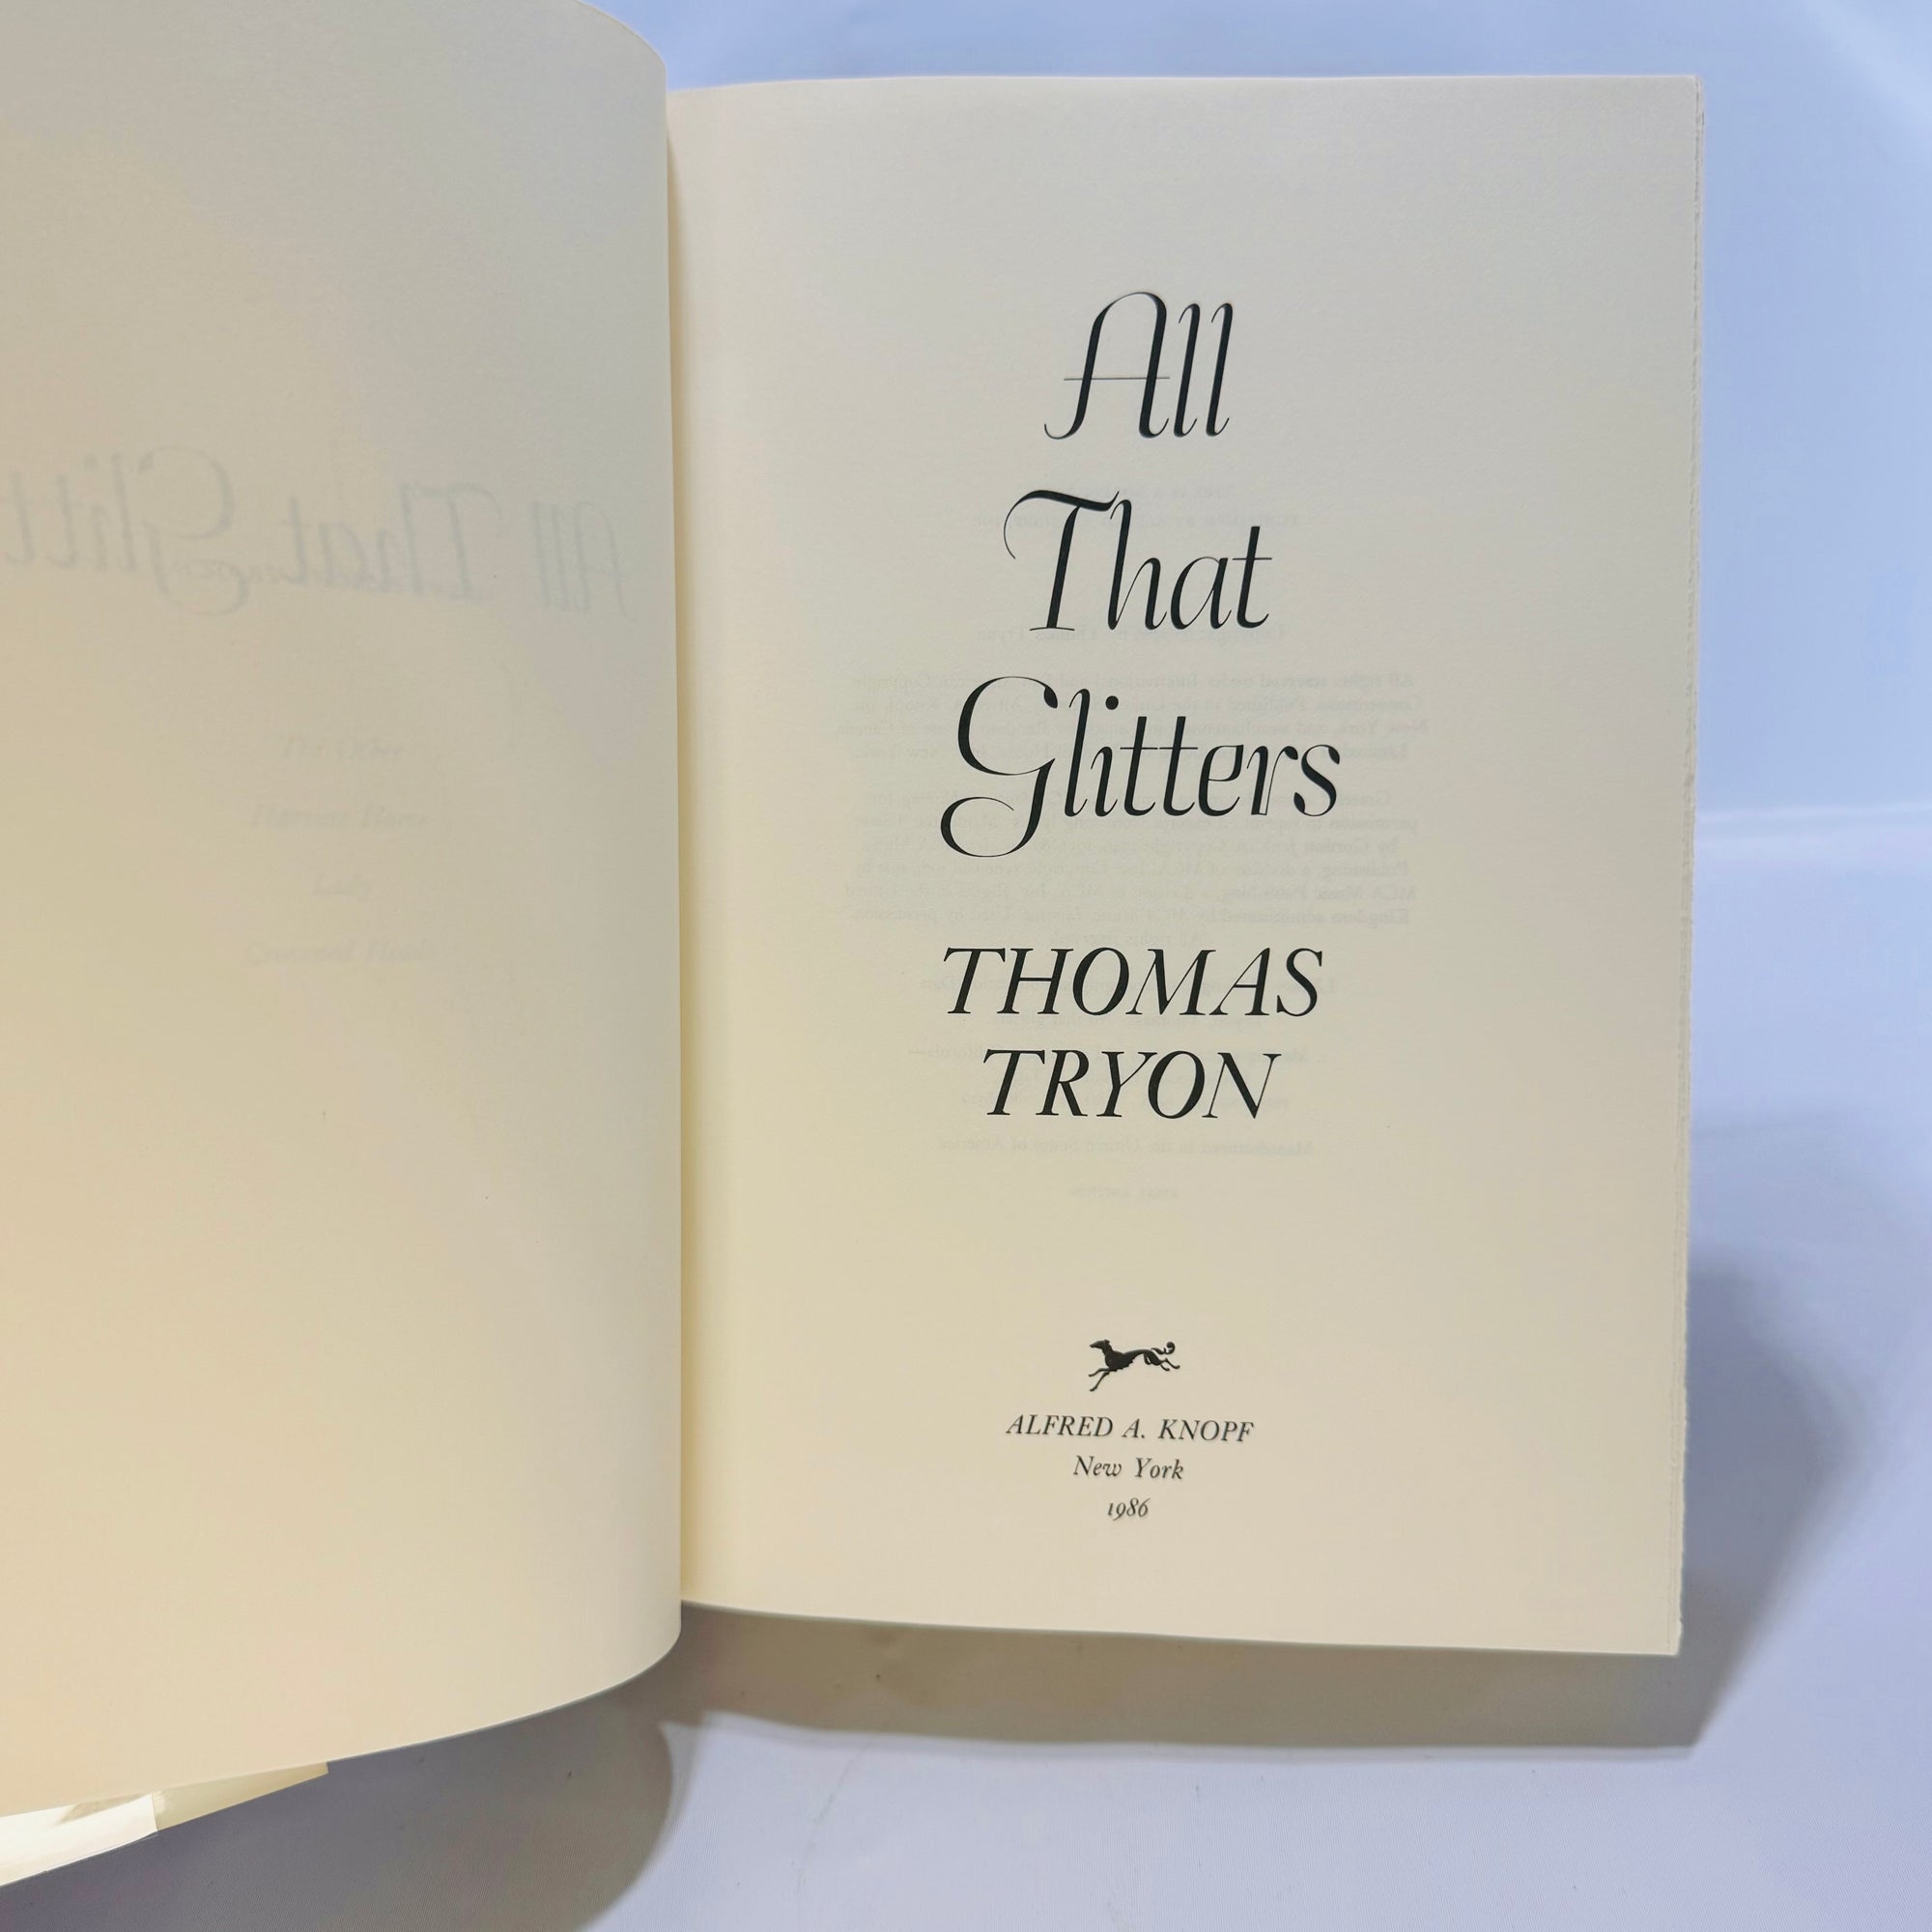 All That Glitters by Thomas Tryon 1986 Alfred A. Knopf